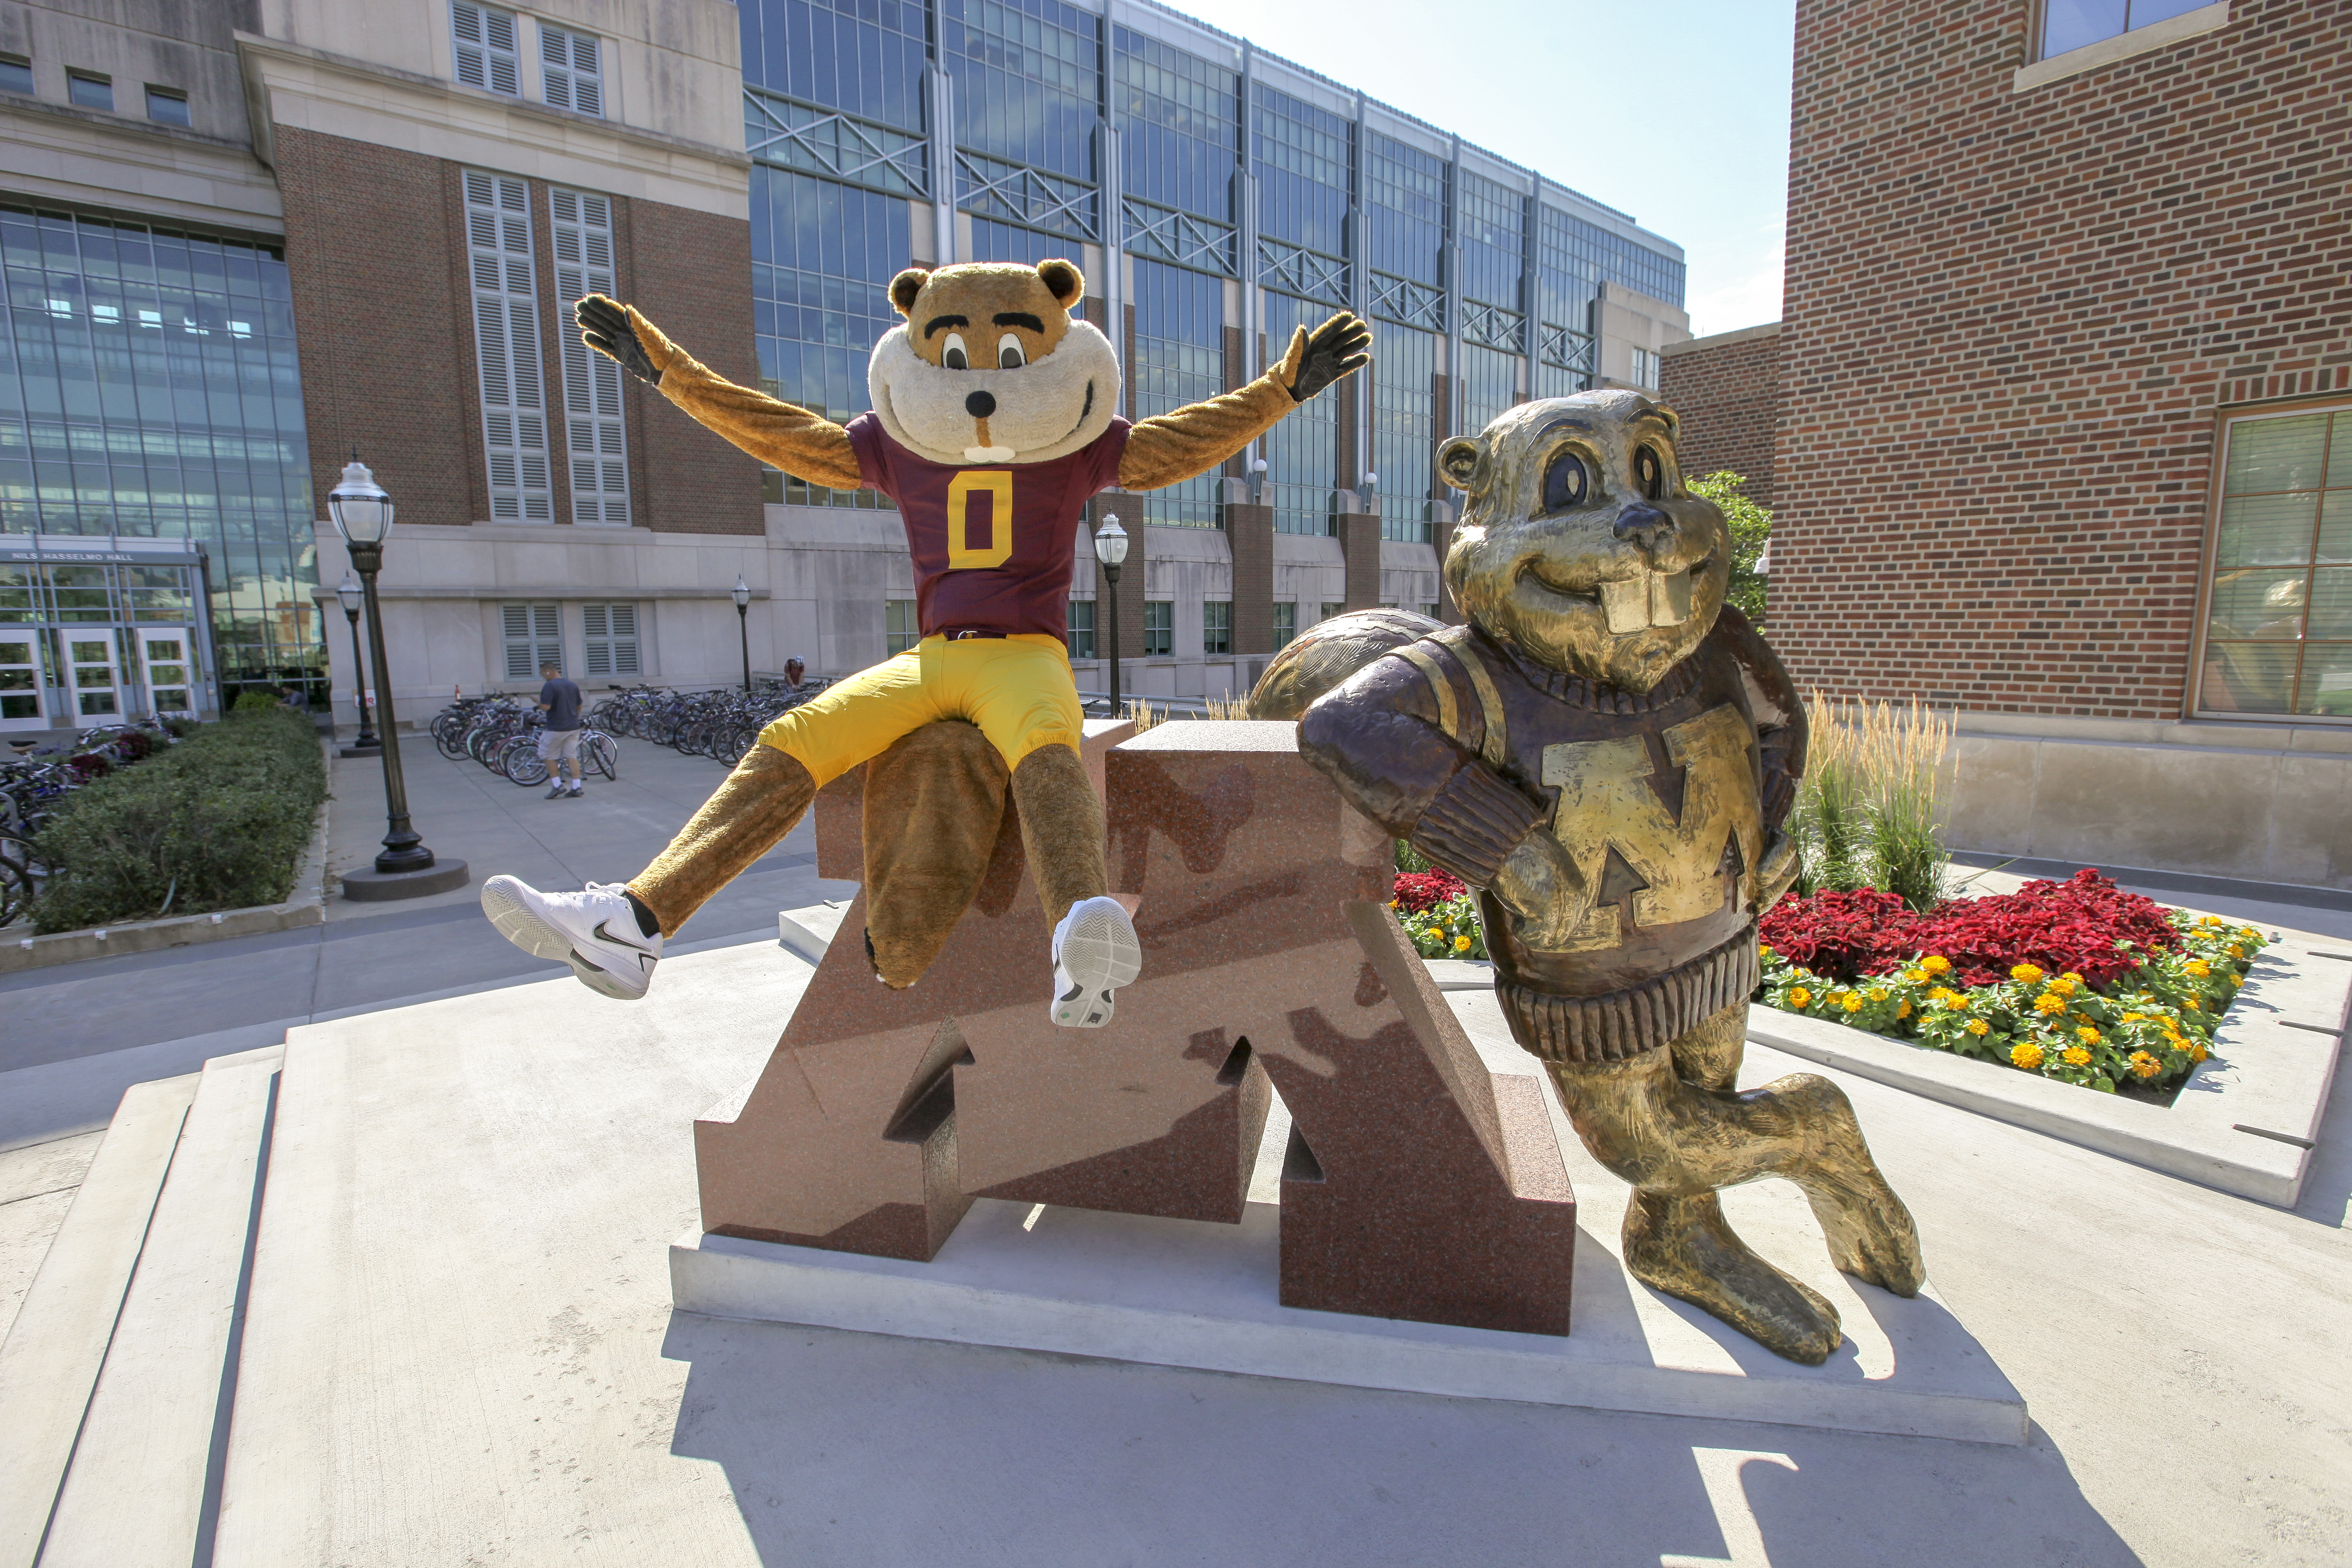 Goldy leaning on a statue